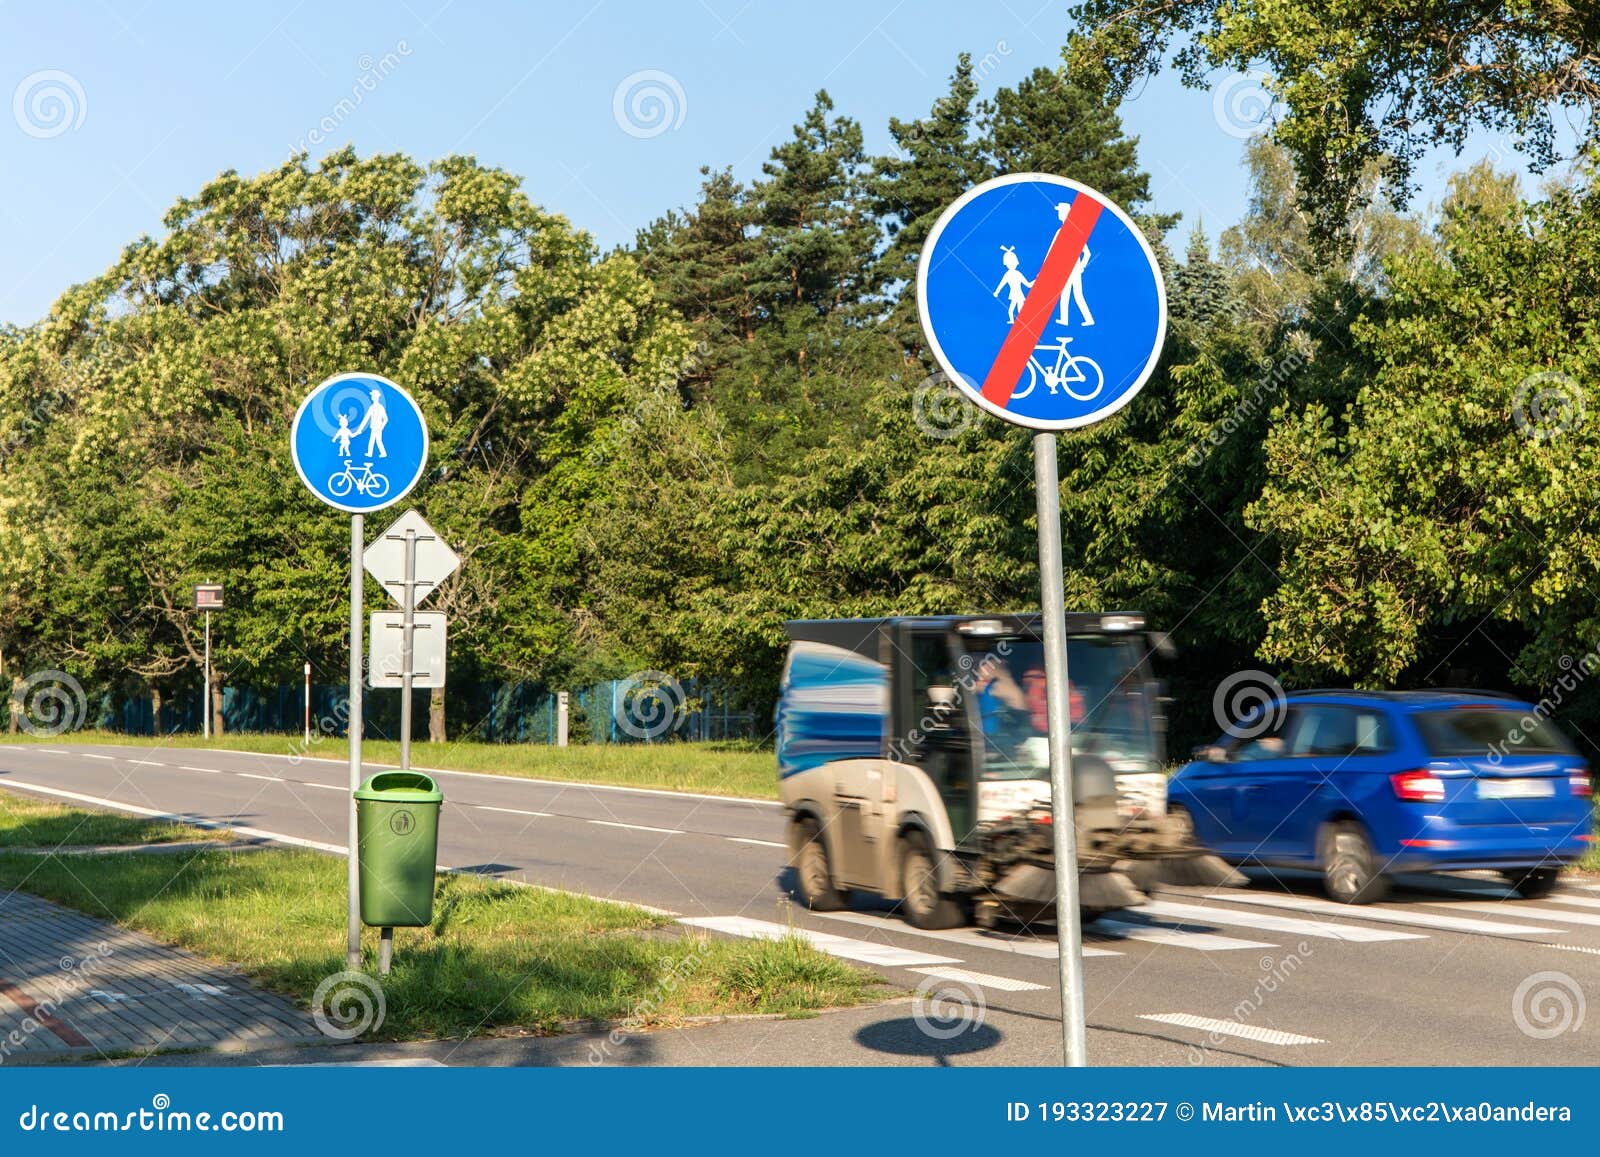 Pedestrian Trail Road Sign In The City Traffic Signs In The Czech Republic Traffic Safety In The City Stock Image Image Of City Direction 193323227